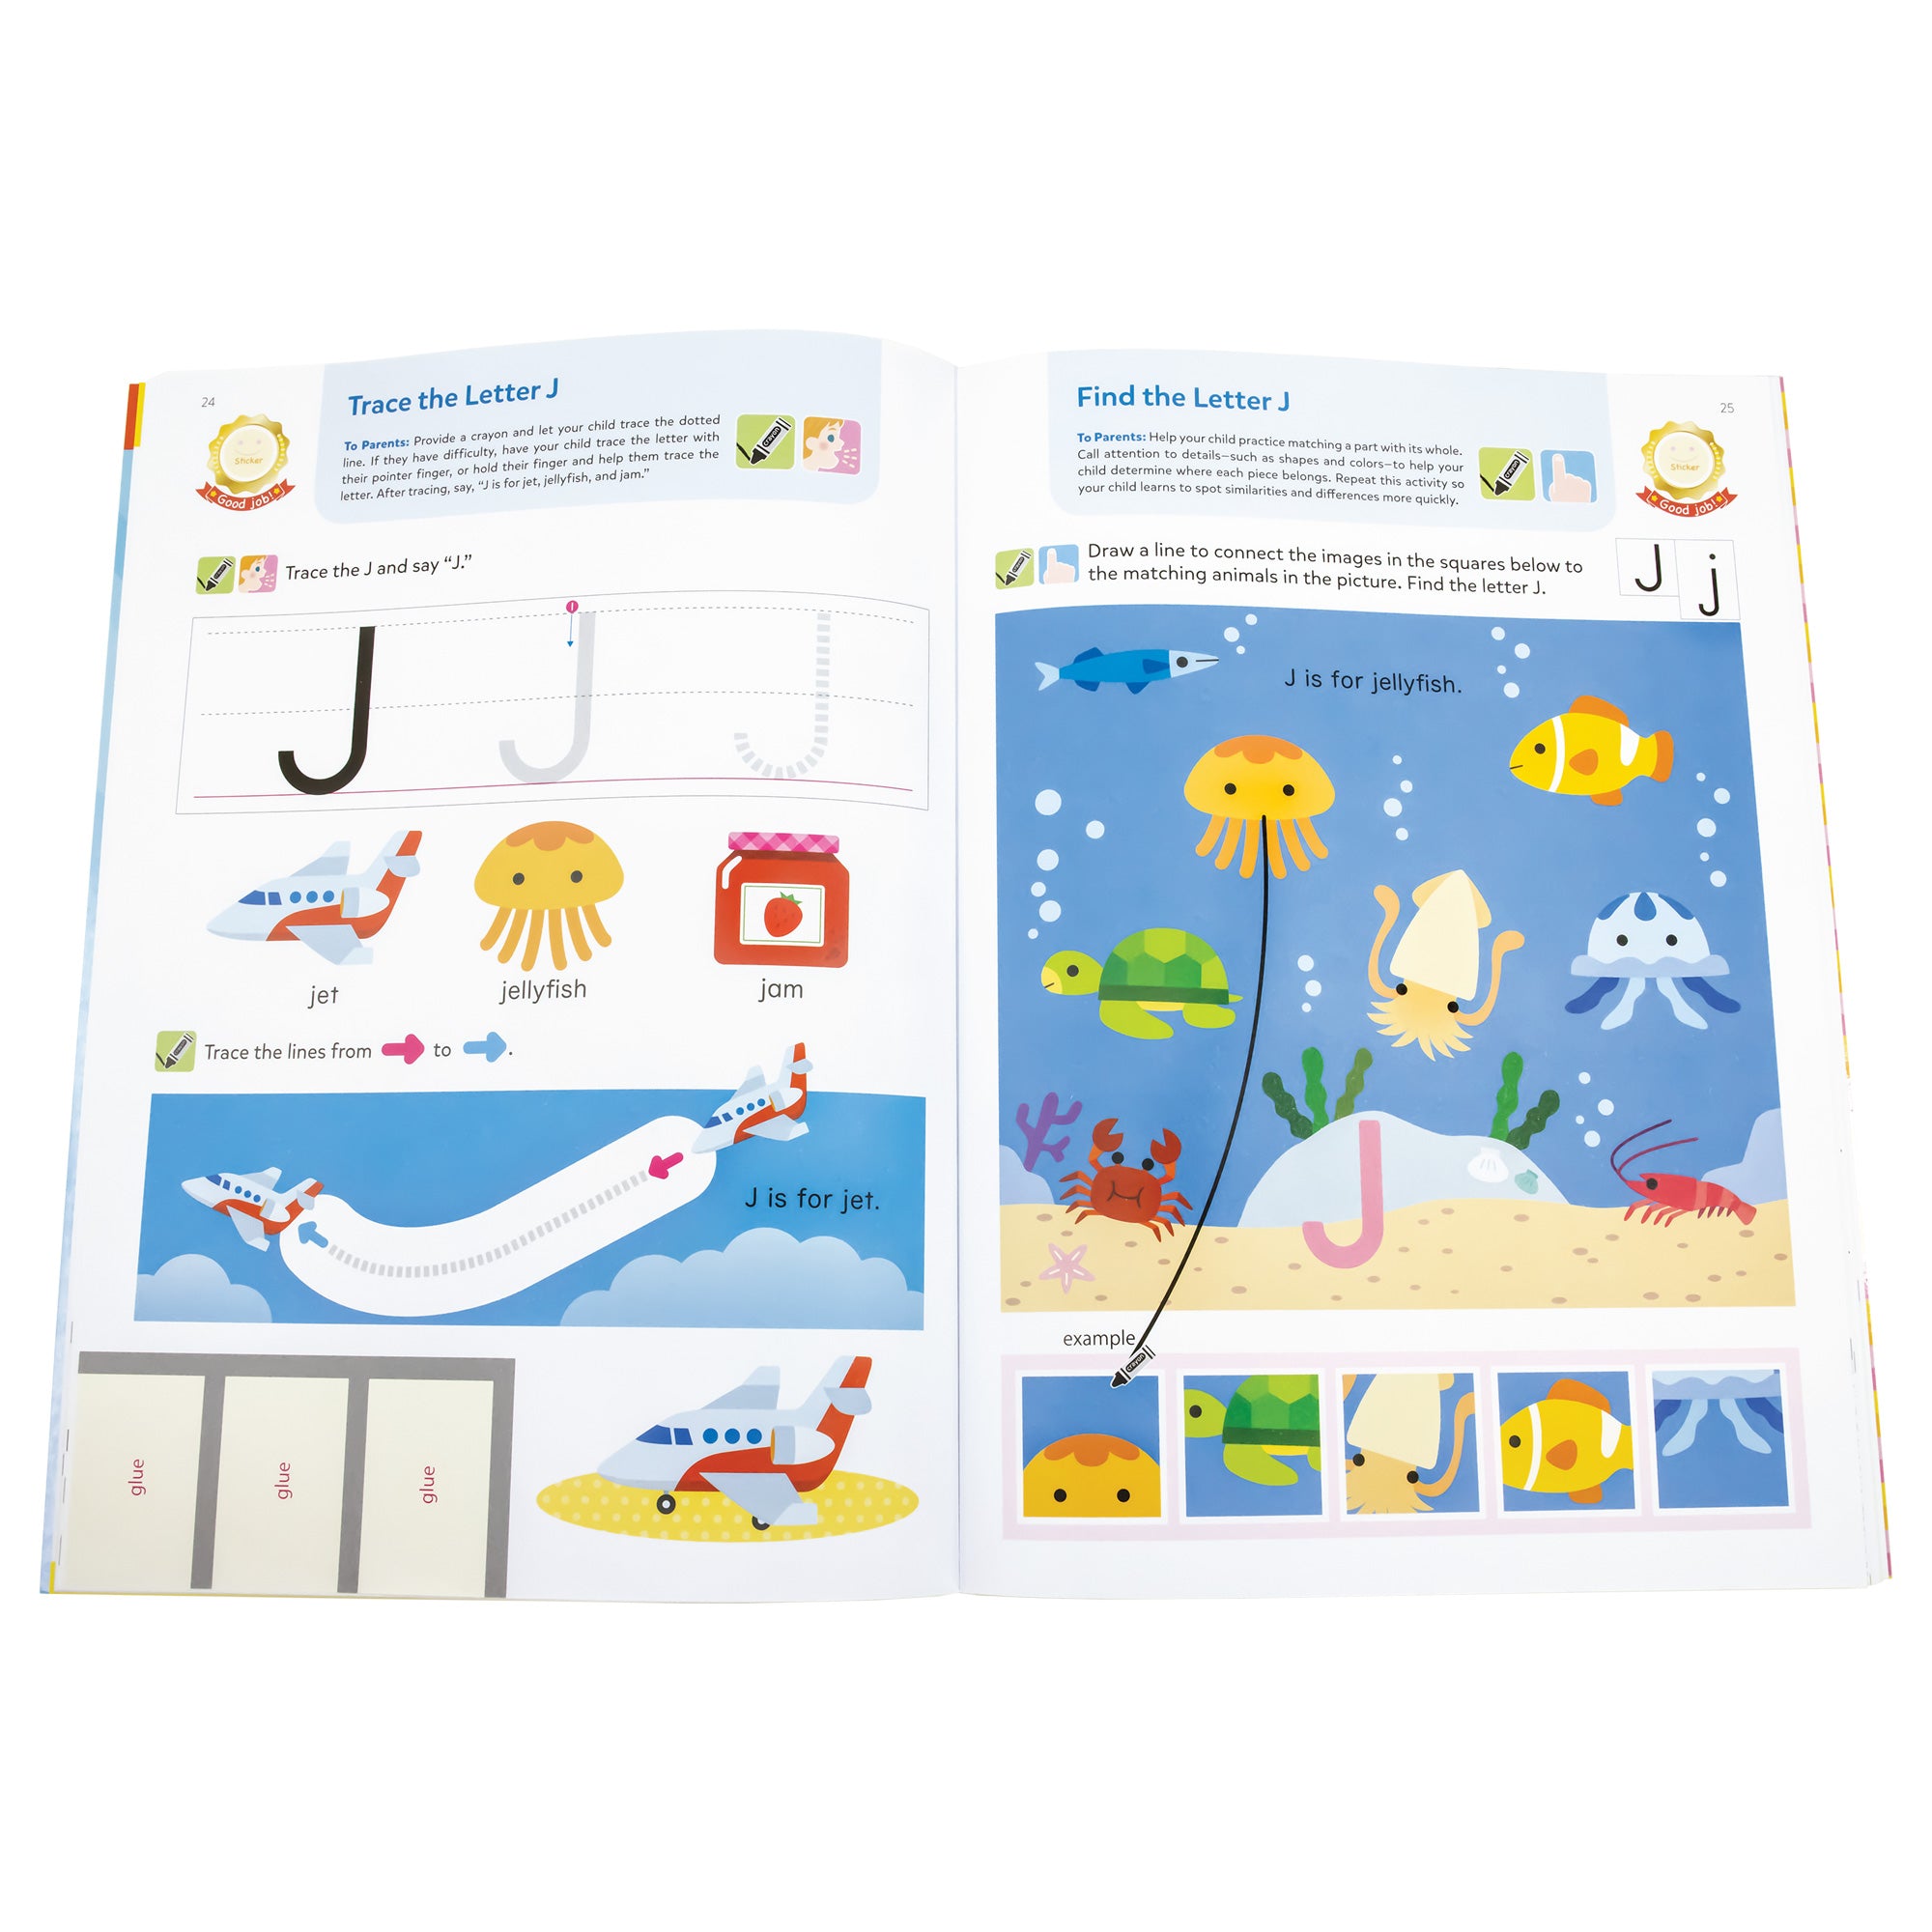 Play Smart Alphabet book open to show the letter J. On the left page, there is a spot to trace the letter next to a large J. Below the tracing spot, there is a jet, a jellyfish, and a jar of jam. Below is a jet flying and line to trace in the sky. On the right page is a an ocean scene with sea creatures and the letter J on it. You are directed to draw a line from the sea creature to the correct picture on the bottom. The row of pictures on the bottom are close-up’s of the sea creatures above.